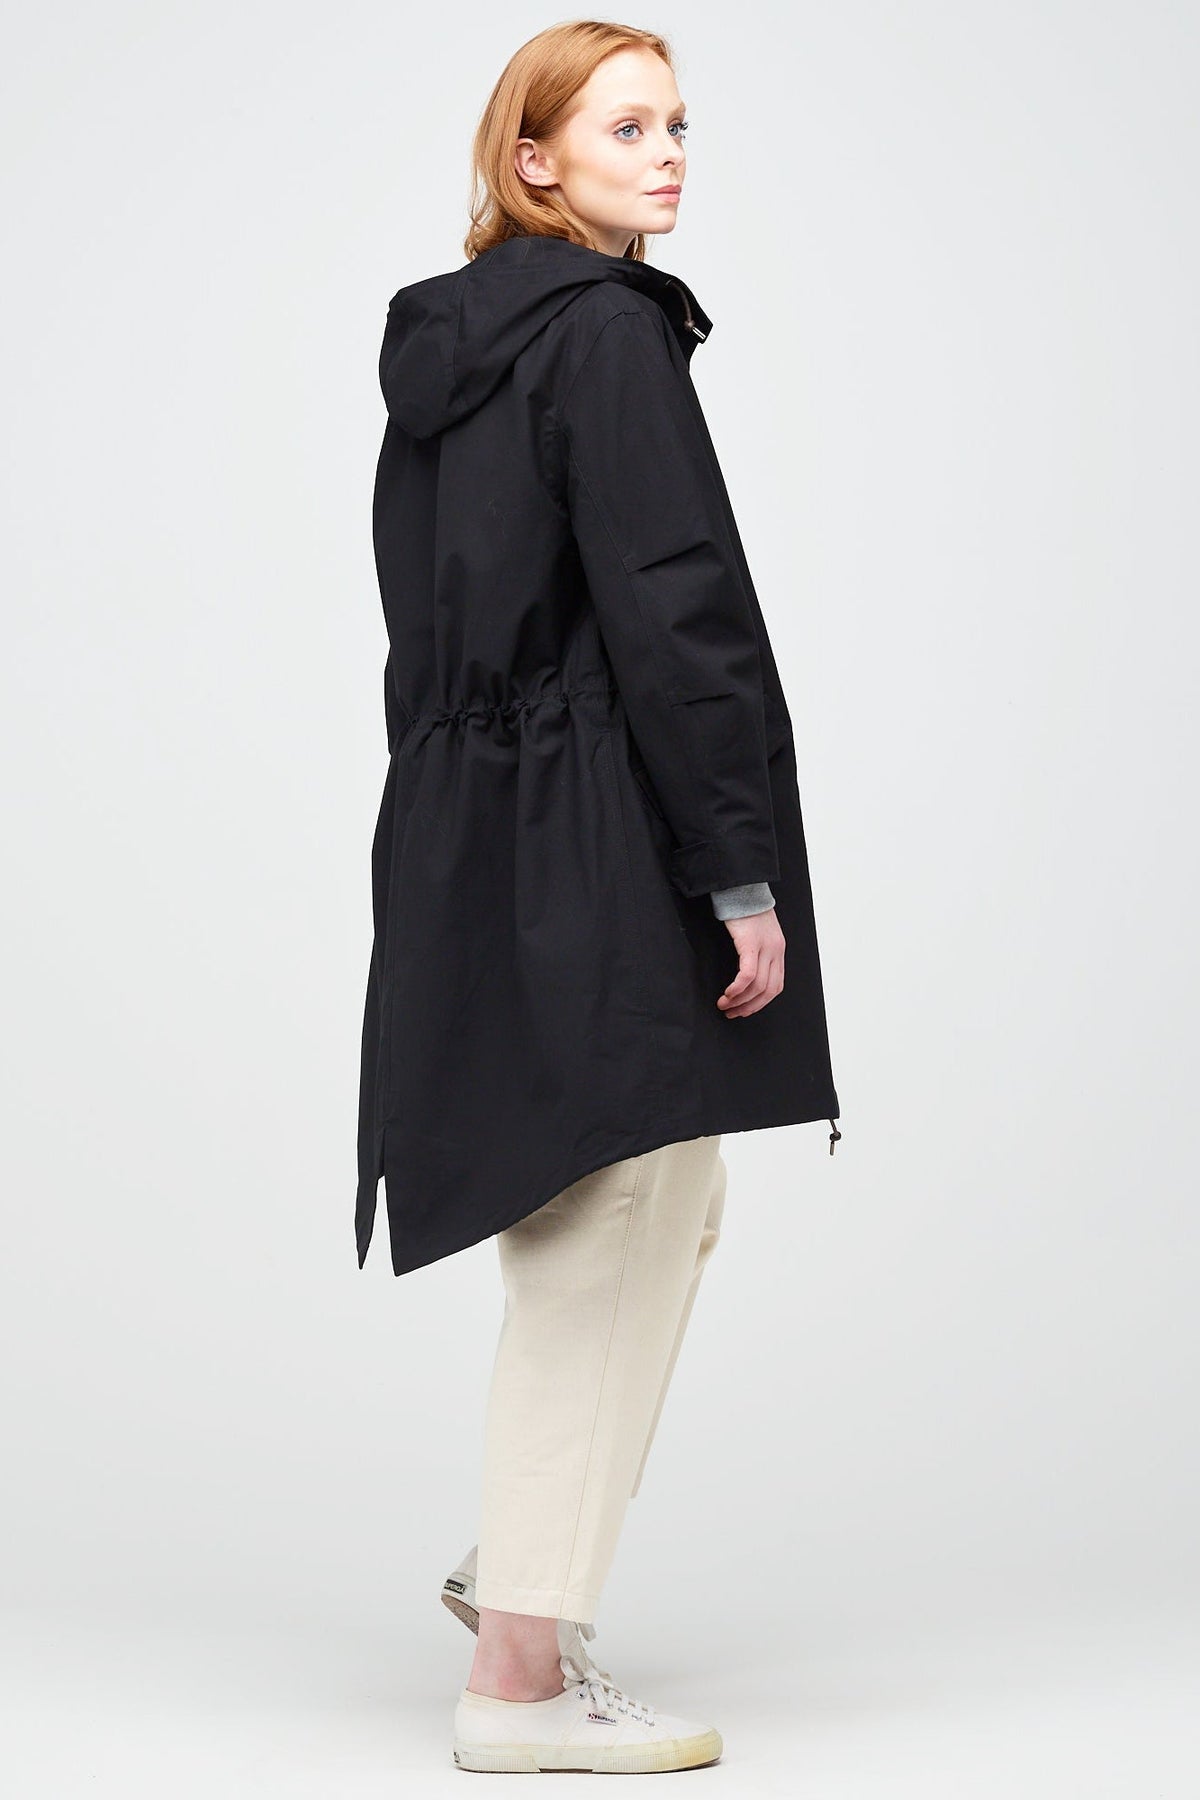 
            rear shot of a a young, white female model with ginger hair wearing a long parka in black. Styled with ecru jeans and a white trainer.